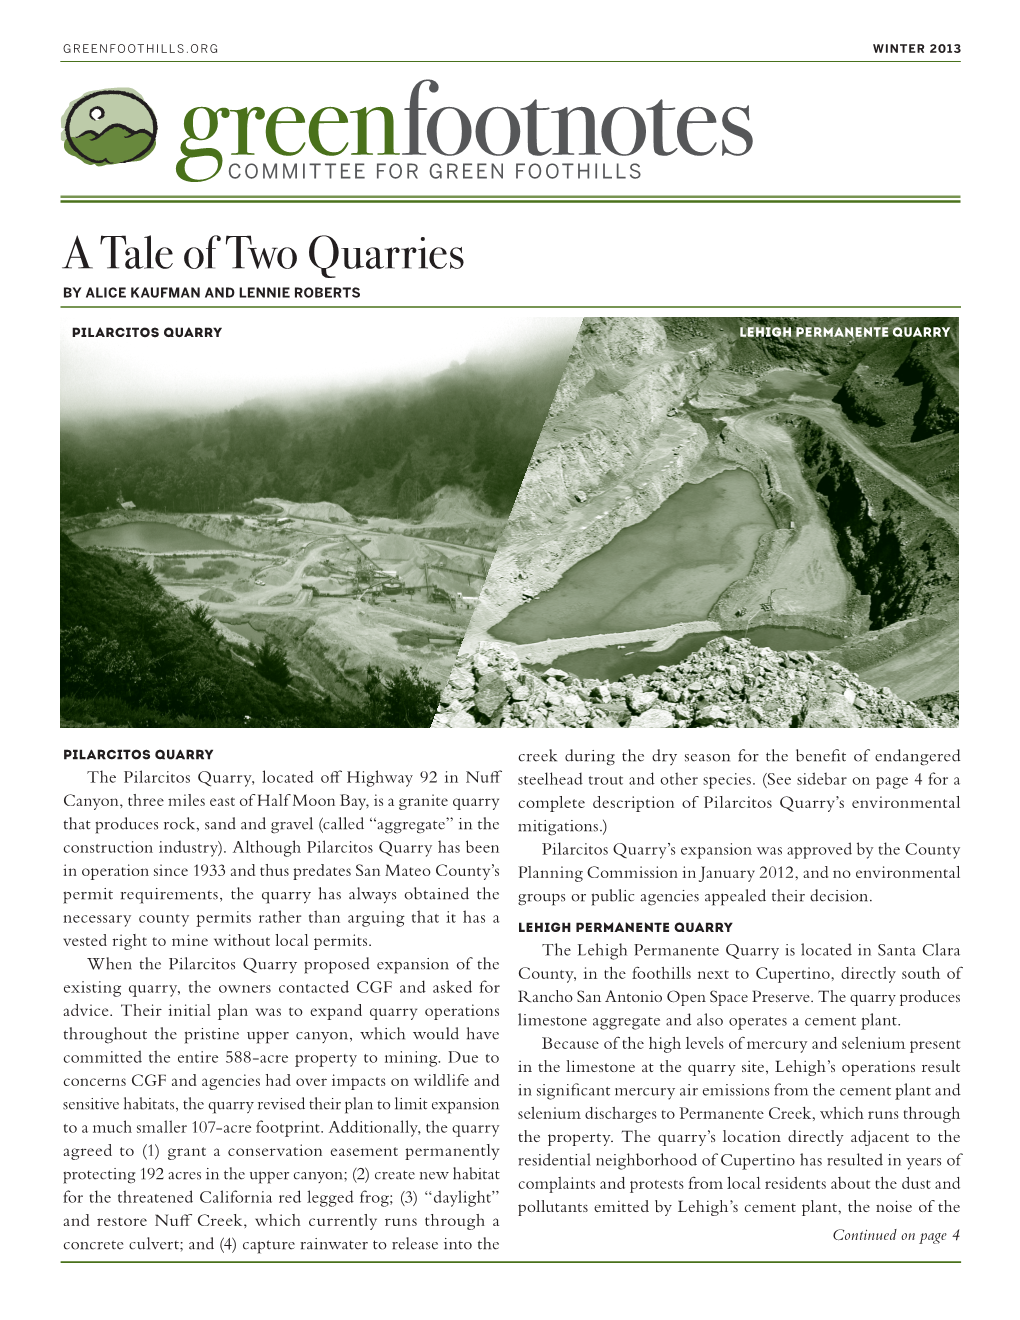 A Tale of Two Quarries by ALICE KAUFMAN and LENNIE ROBERTS